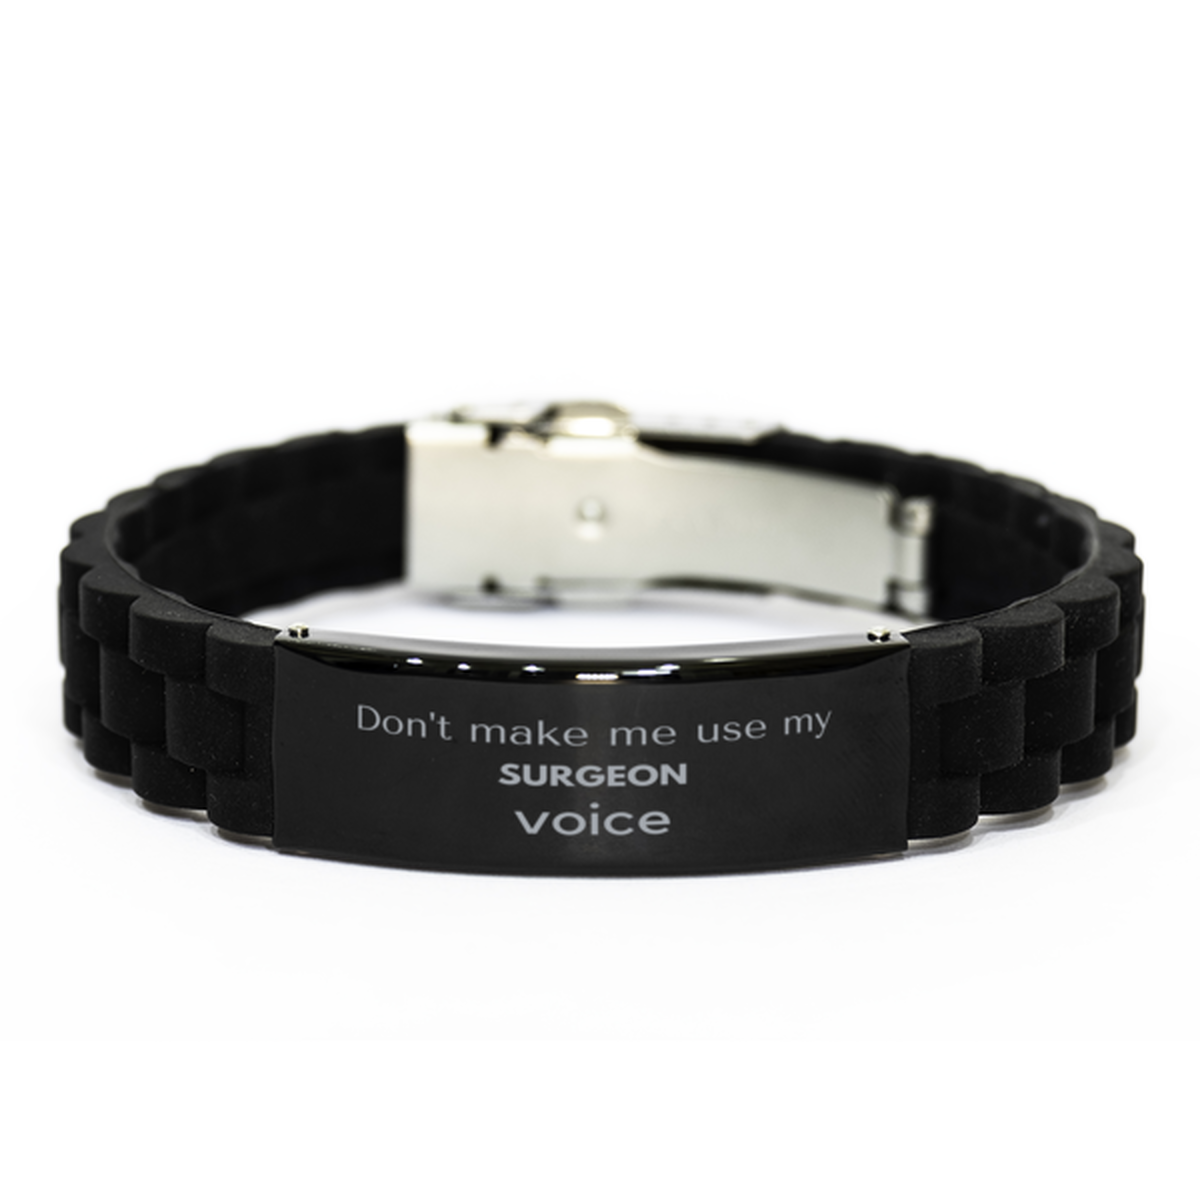 Don't make me use my Surgeon voice, Sarcasm Surgeon Gifts, Christmas Surgeon Black Glidelock Clasp Bracelet Birthday Unique Gifts For Surgeon Coworkers, Men, Women, Colleague, Friends